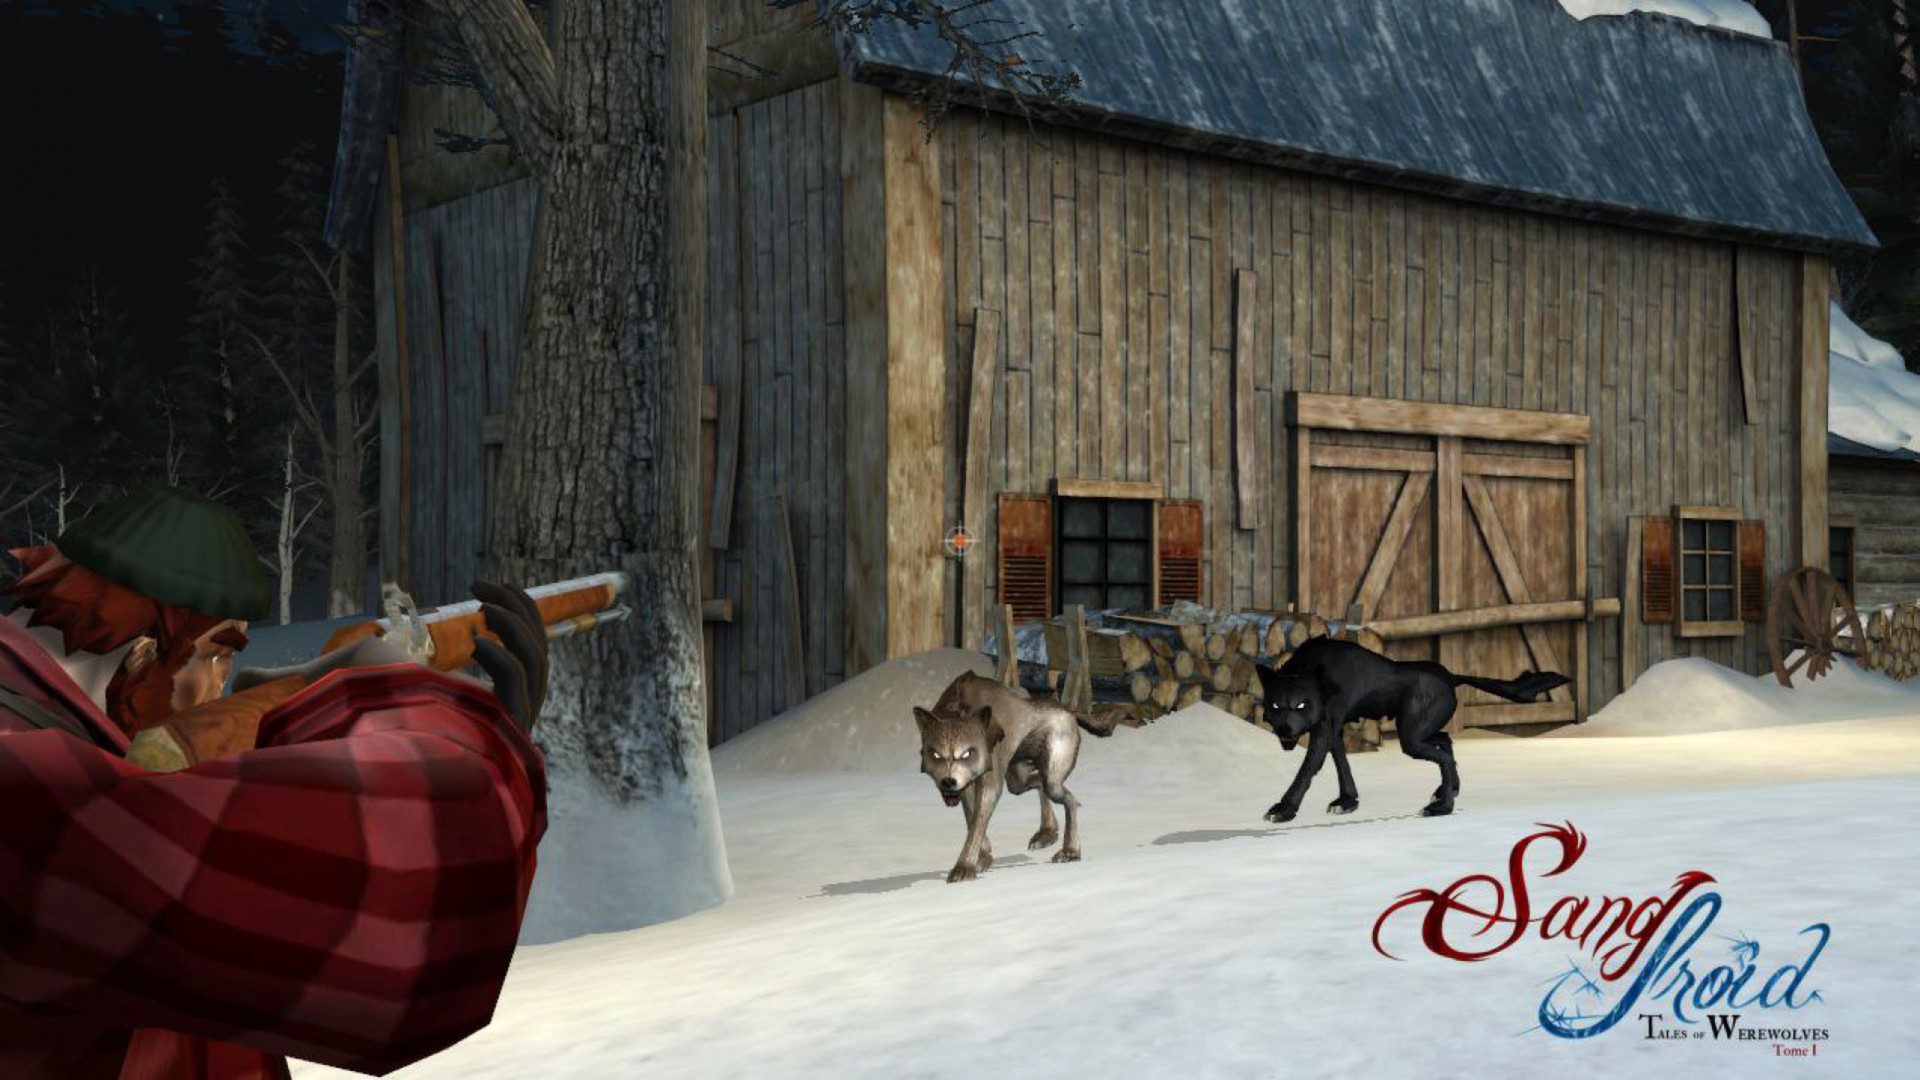 Sang-Froid: Tales of Werewolves has gone Free to Play